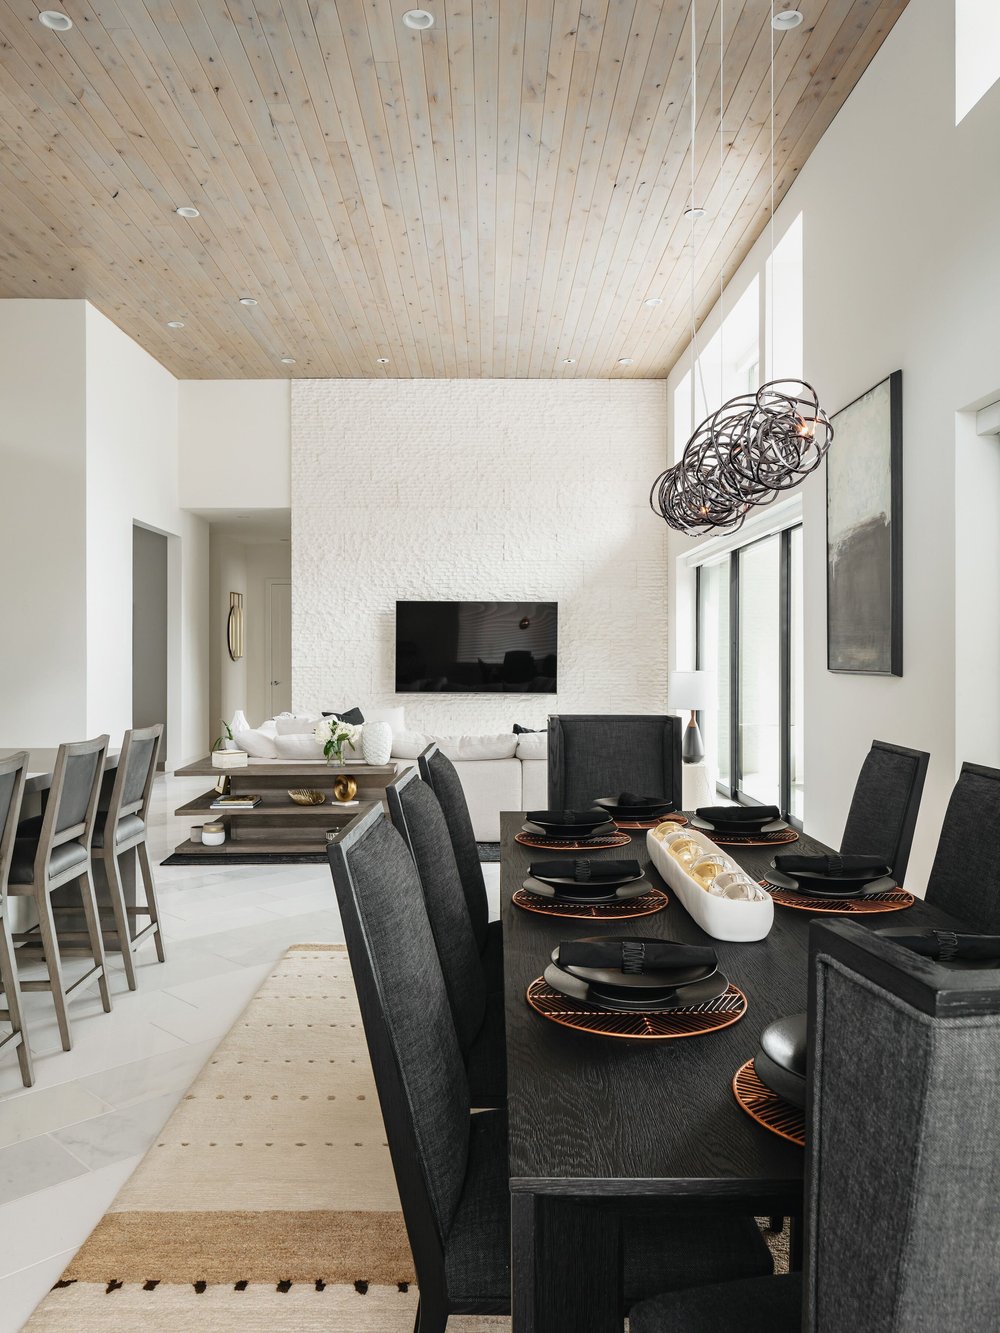  Natural wood textured ceilings in a modern dining room with long, black dining table, black dining chairs with backs.  